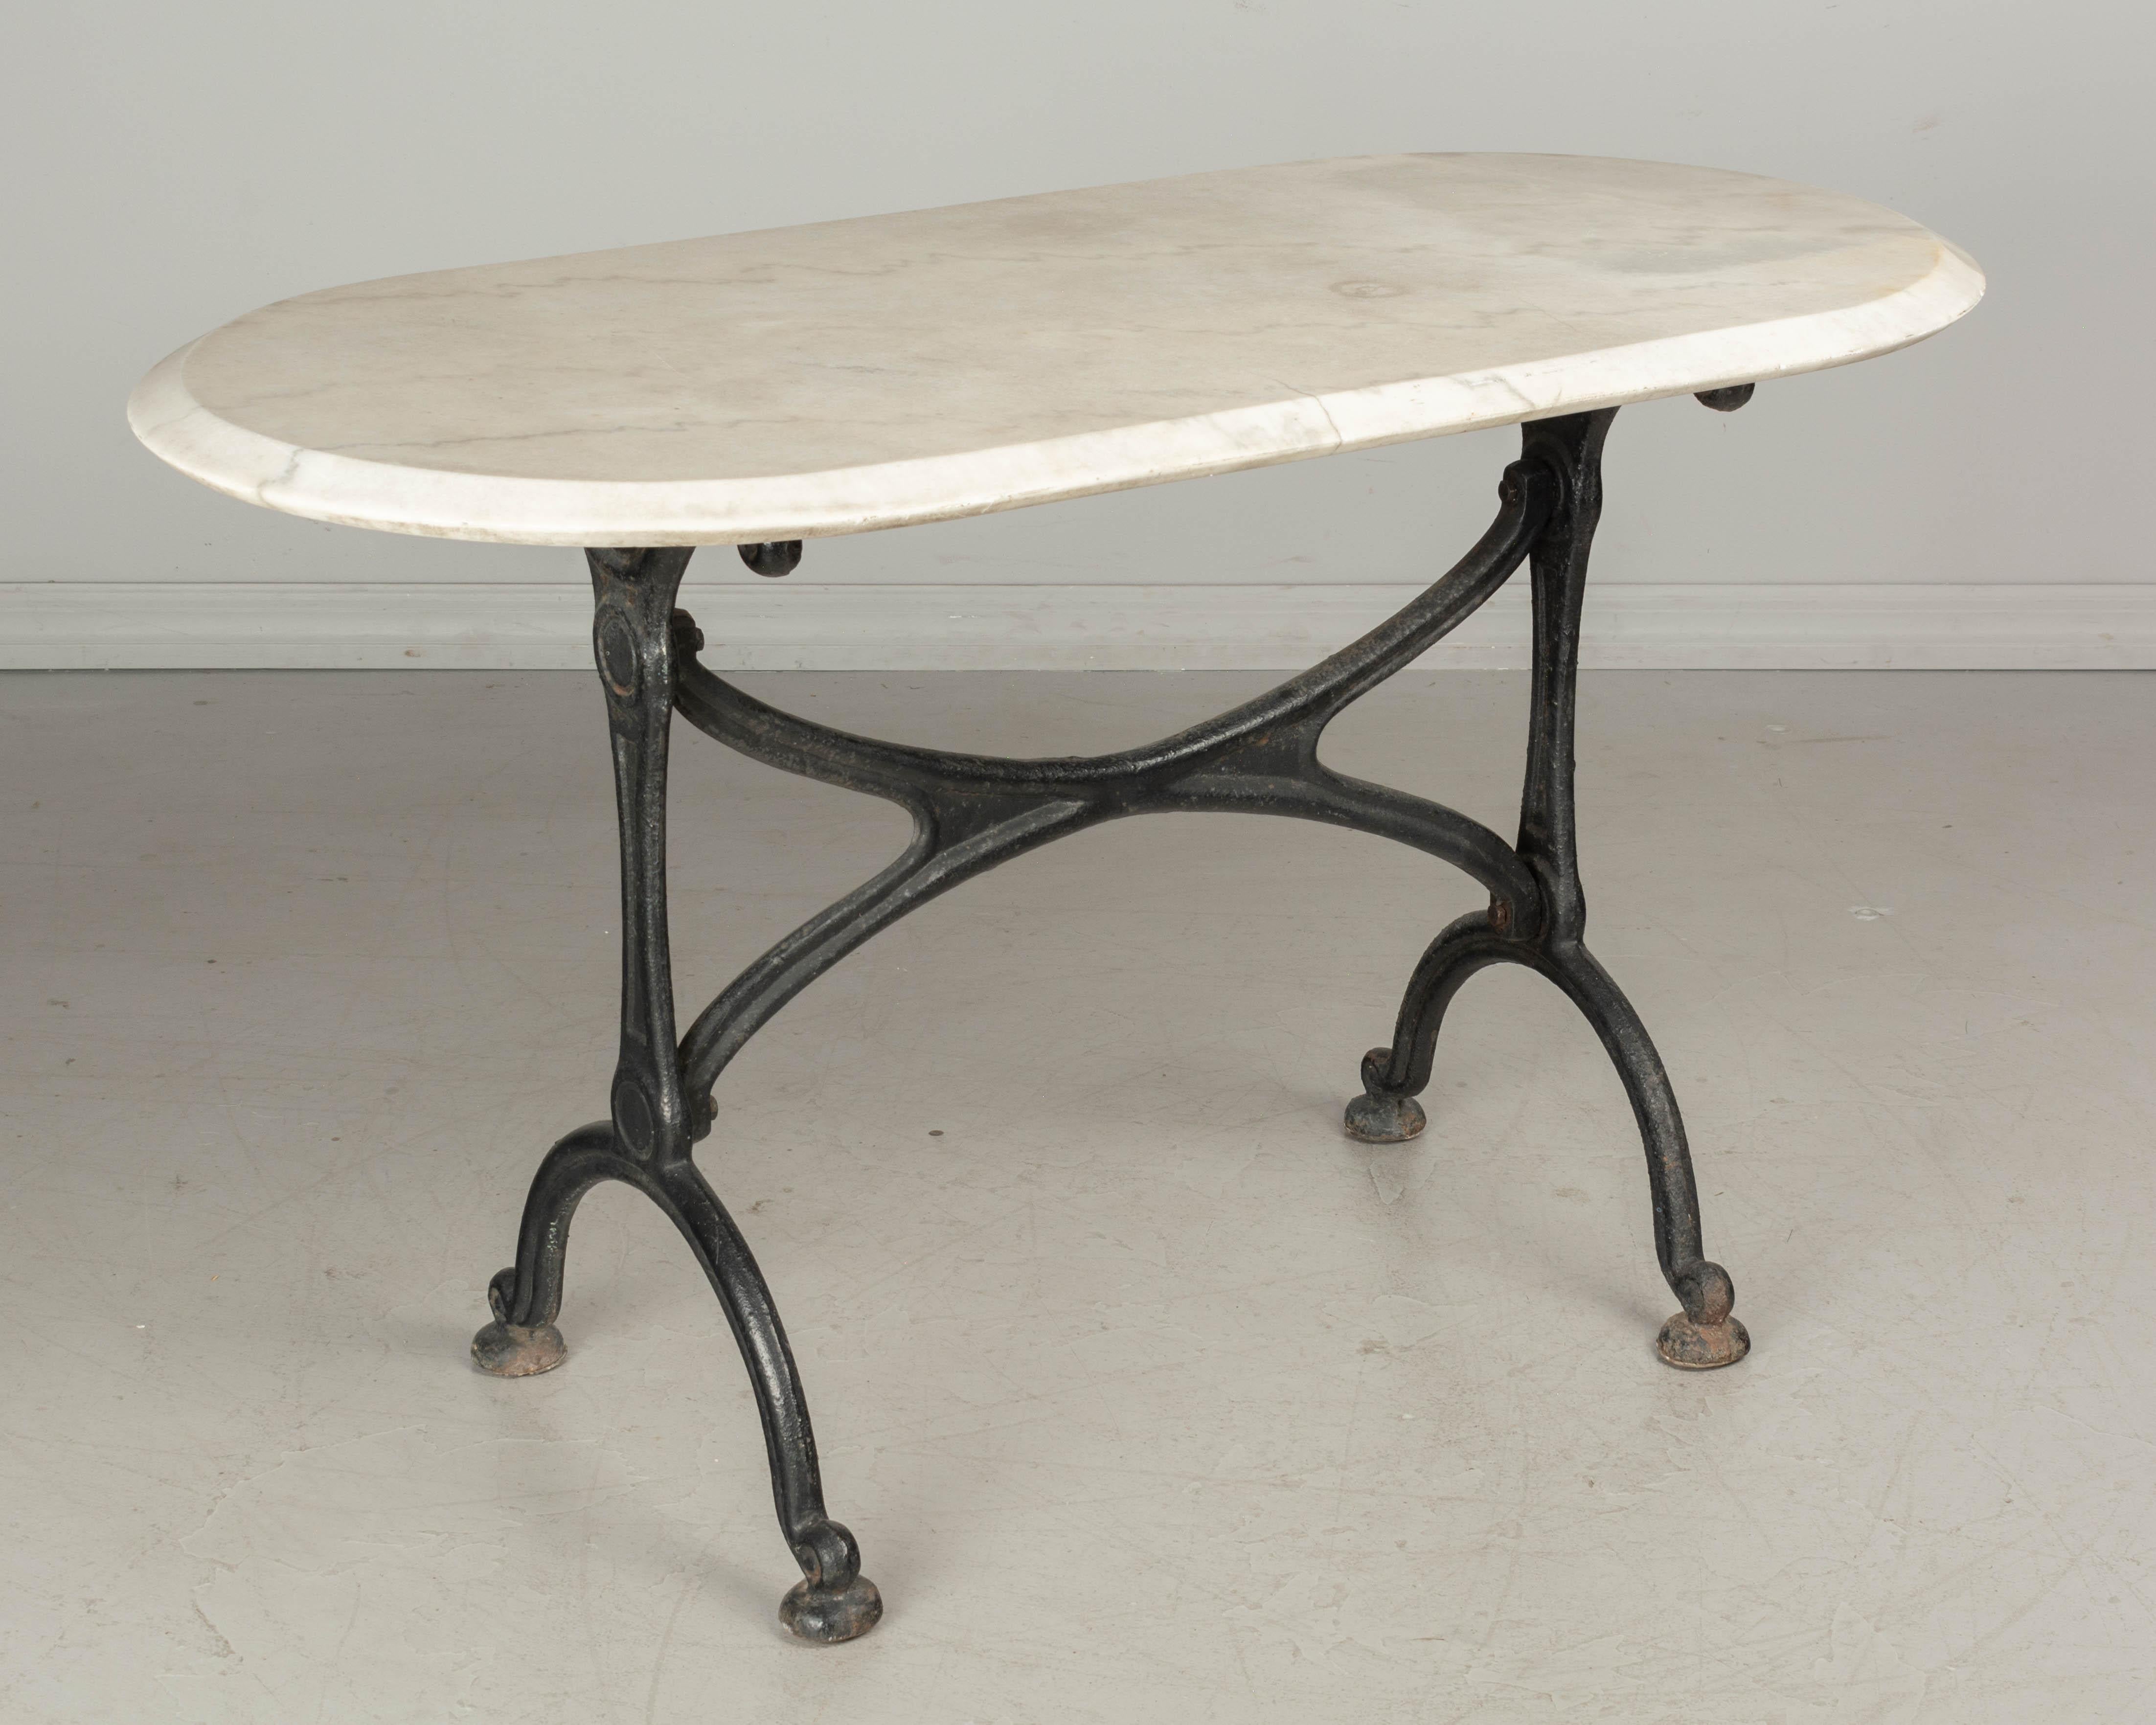 A 19th century French cast iron marble top bistro, or garden table. Heavy black painted base with good quality casting and thick stretcher. Rusty patina at the feet. Large marble top has curved corners and a deep beveled edge. Marble is from a later